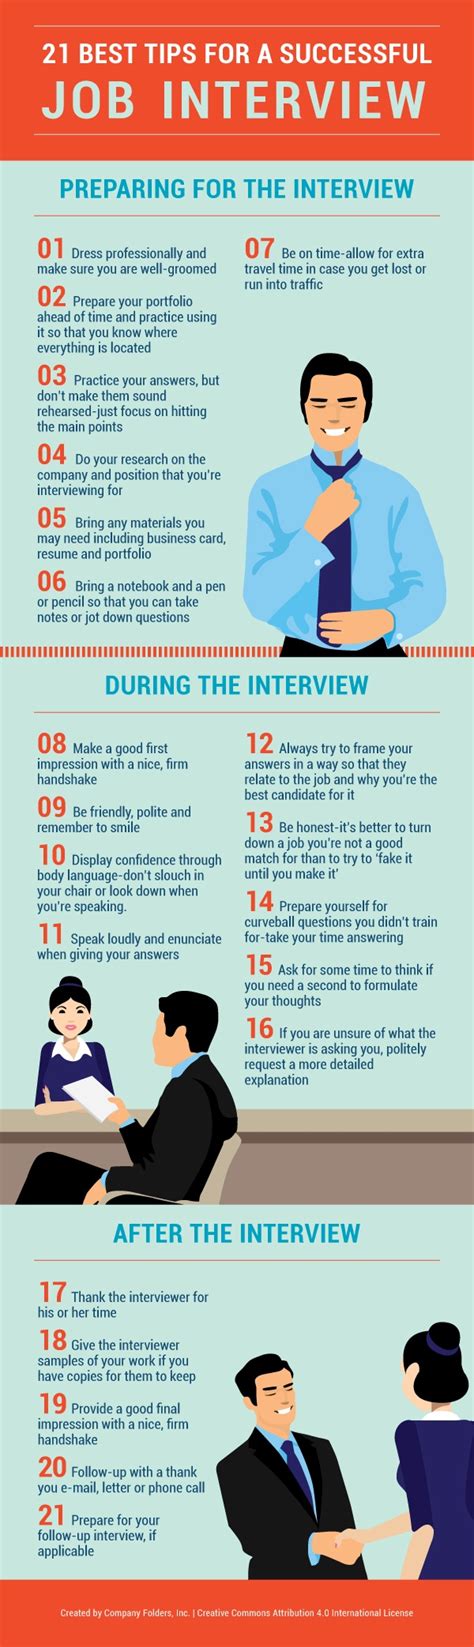 Interview a quick guide to winning the job interviews. - Opera hotel reservation system training manual.